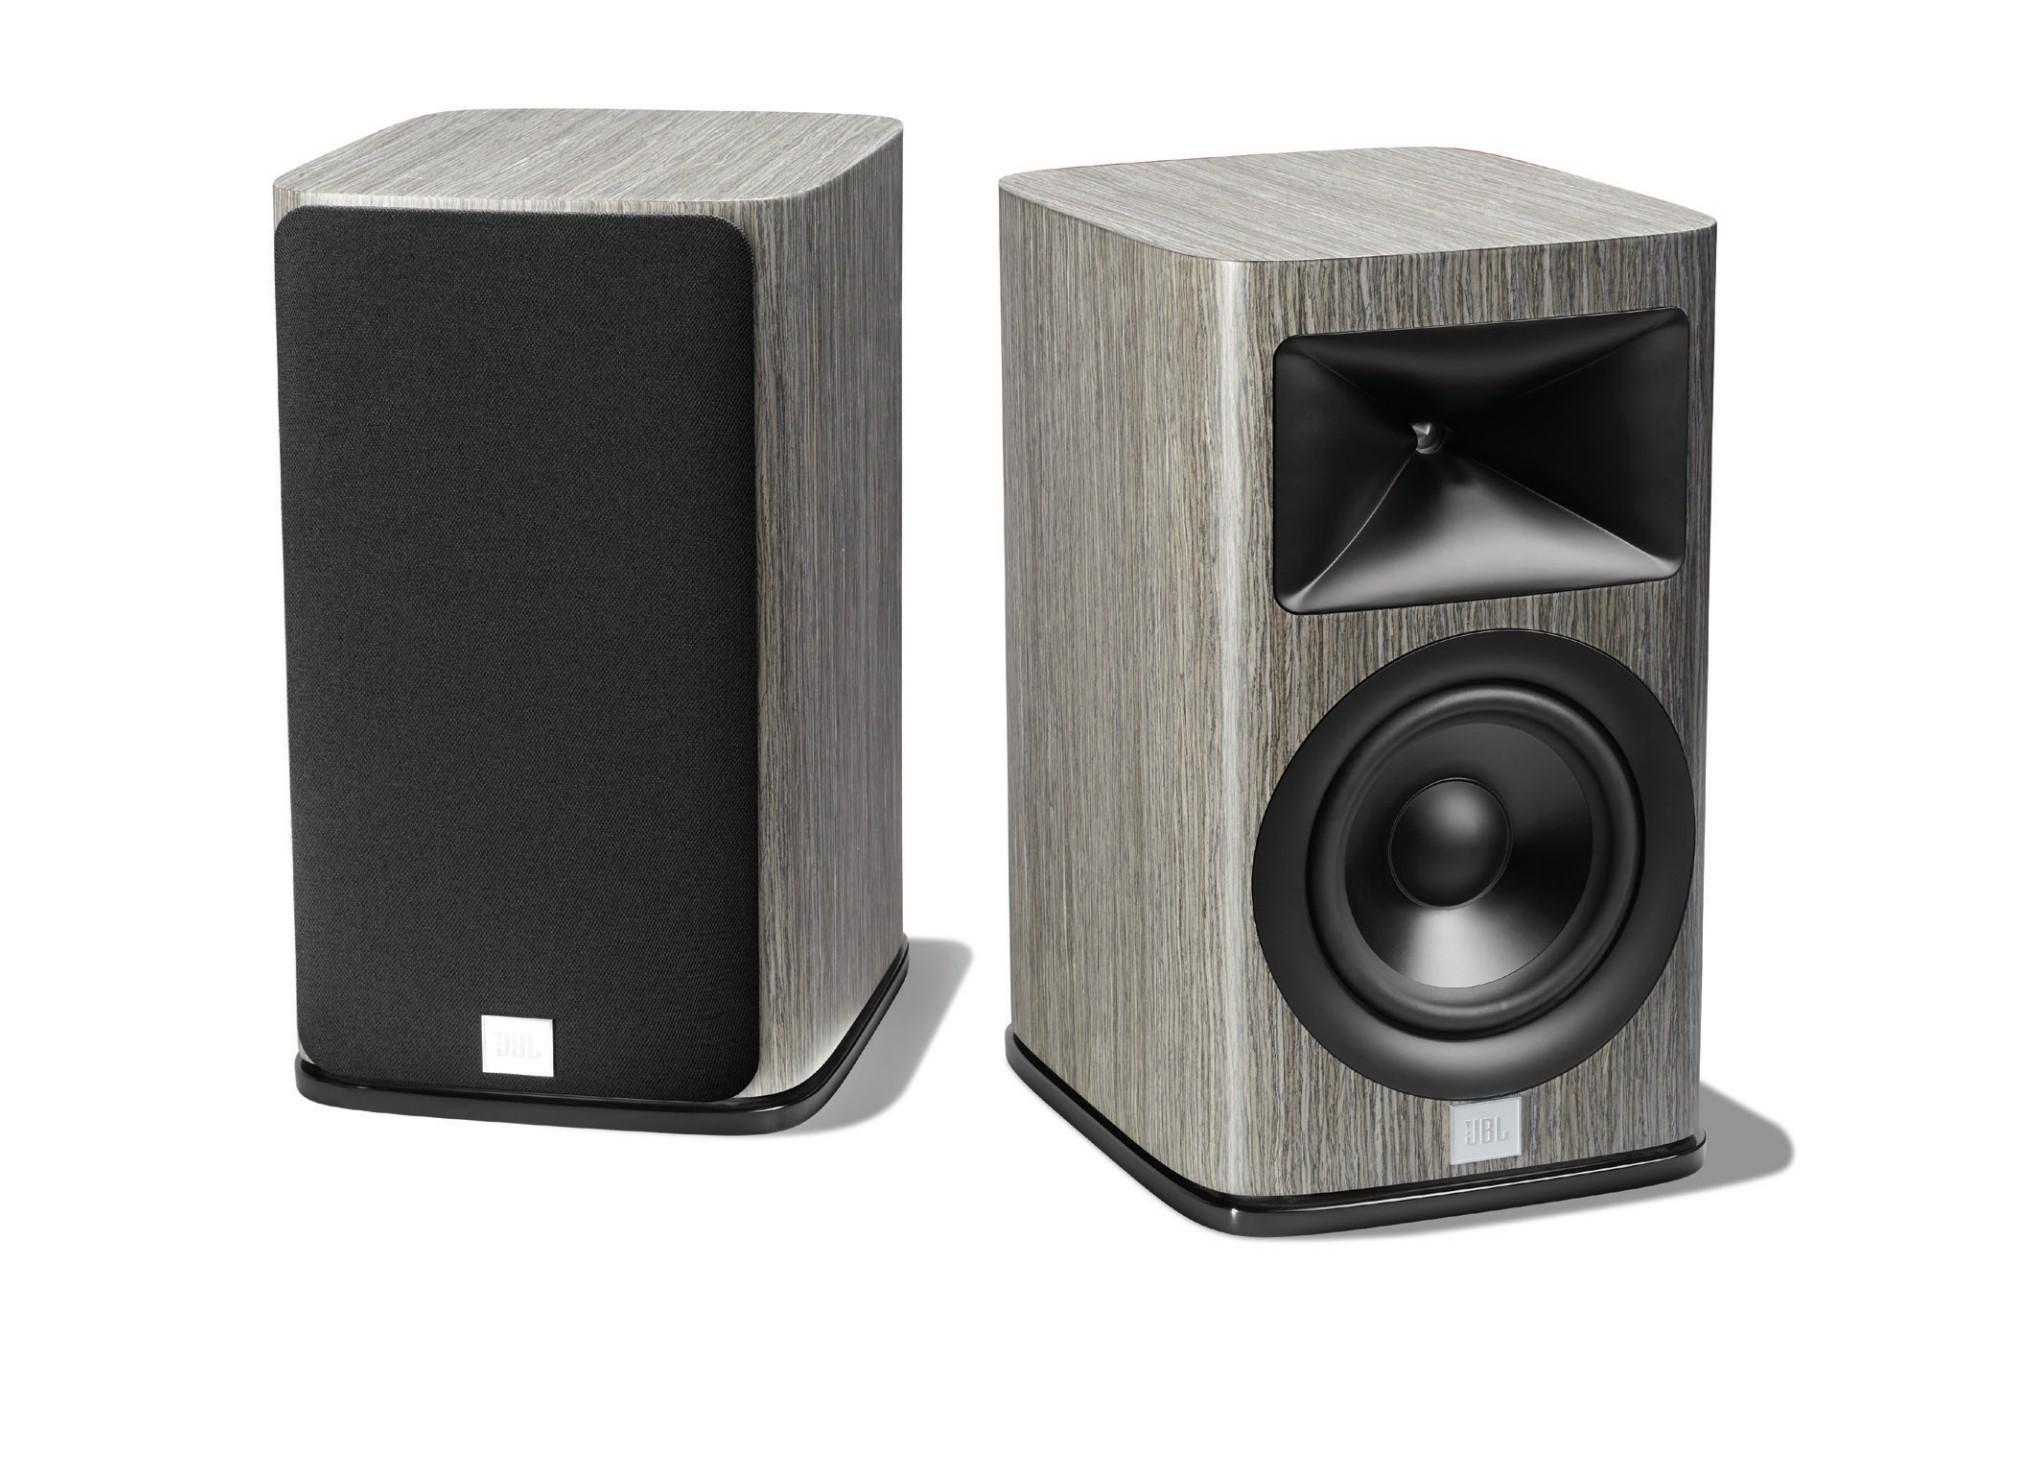 Hard Rockin' & Cohesive: JBL Synthesis HDI-1600 2-Way Bookshelf Review - HomeTheaterReview